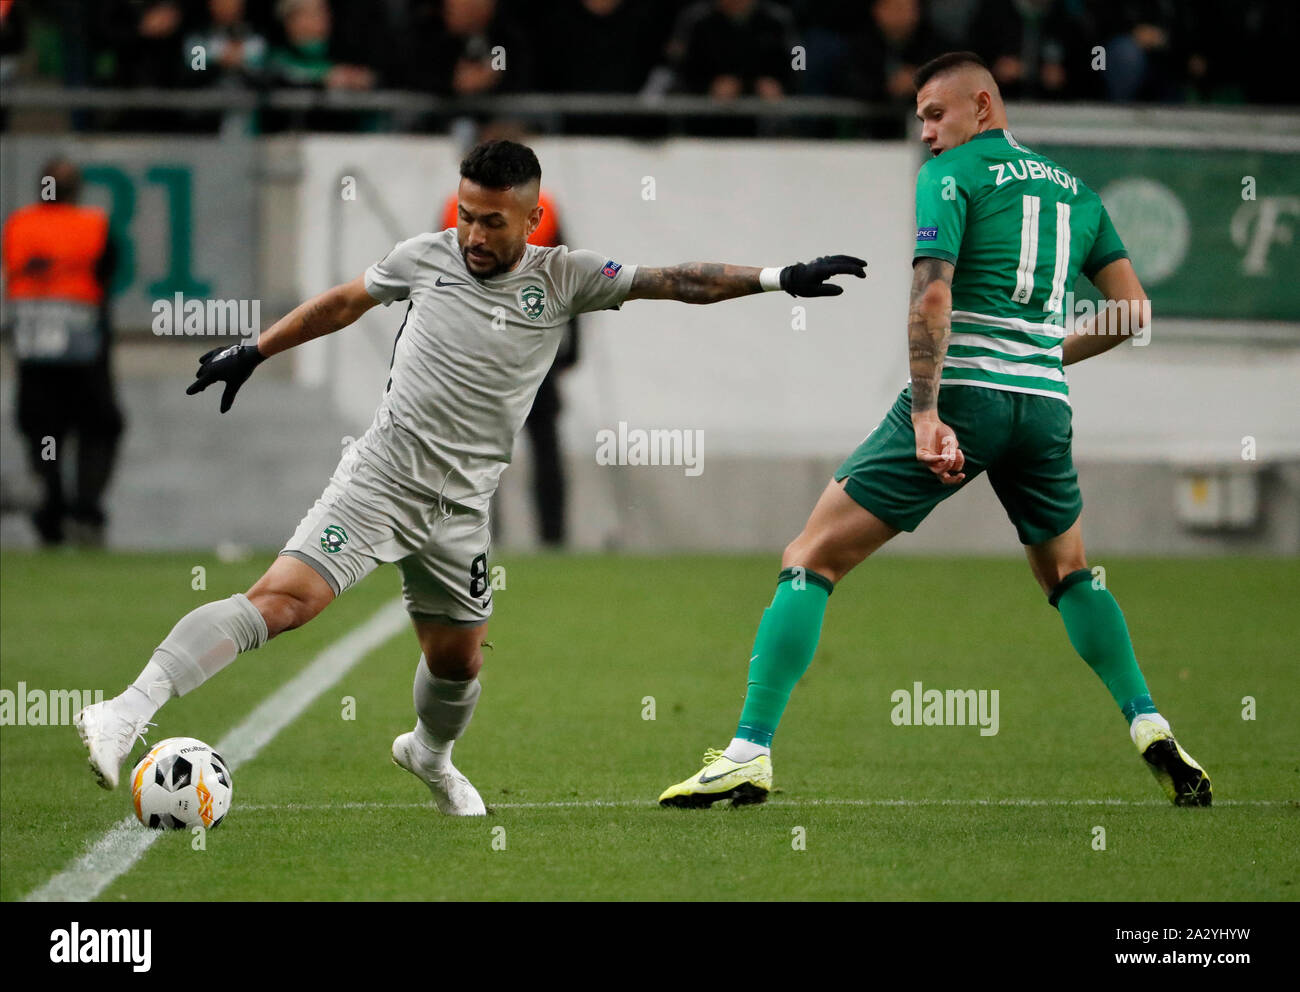 BUDAPEST, HUNGARY - OCTOBER 3: (l-r) Wanderson of PFC Ludogorets 1945 dribbles next to Oleksandr Zubkov of Ferencvarosi TC during the UEFA Europa League Group Stage match between Ferencvarosi TC and PFC Ludogorets 1945 at Ferencvaros Stadium on October 3, 2019 in Budapest, Hungary. Stock Photo